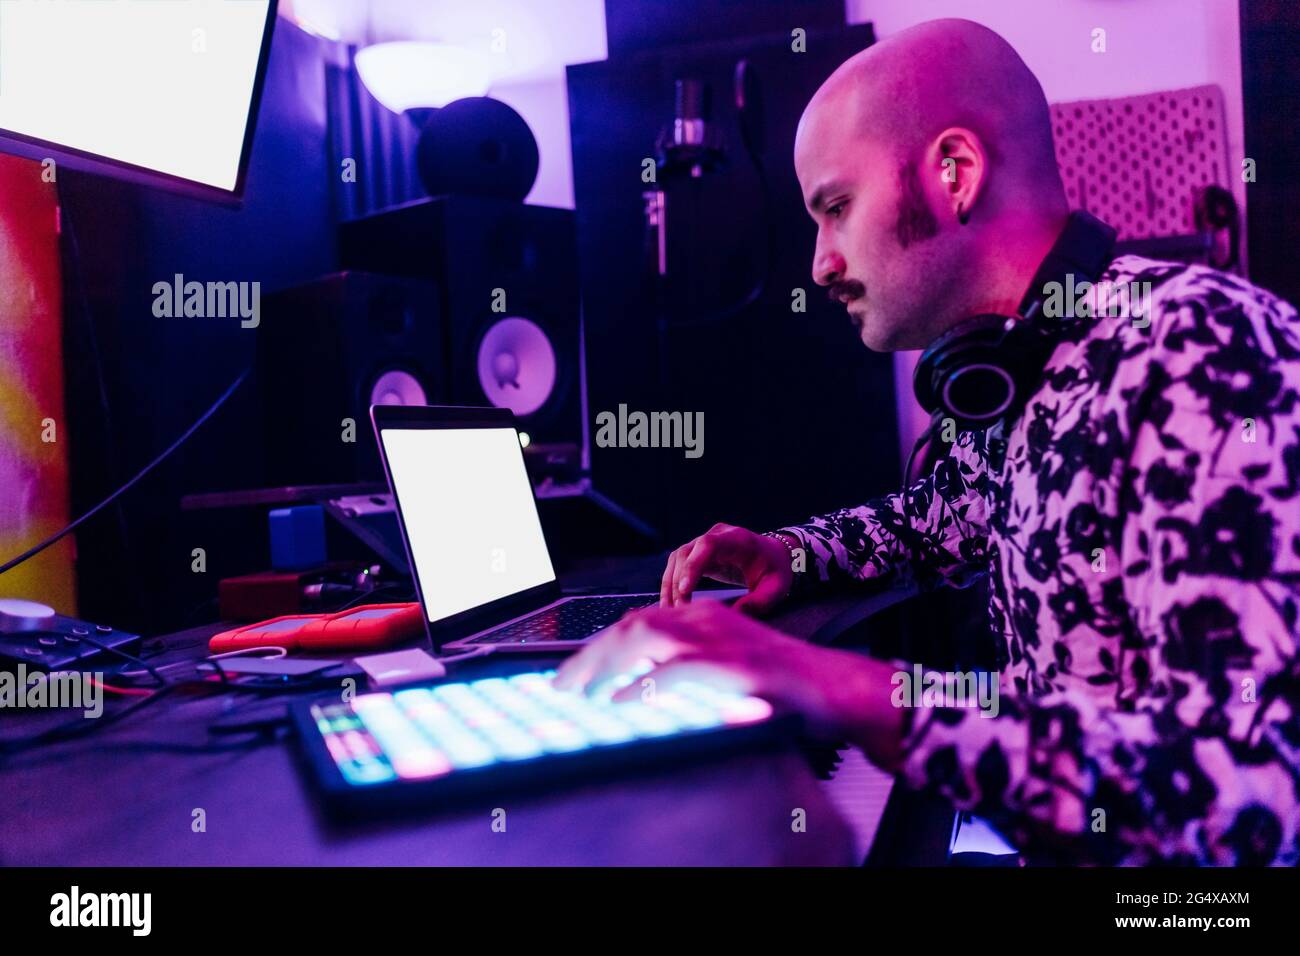 Male music composer using laptop at home studio Stock Photo